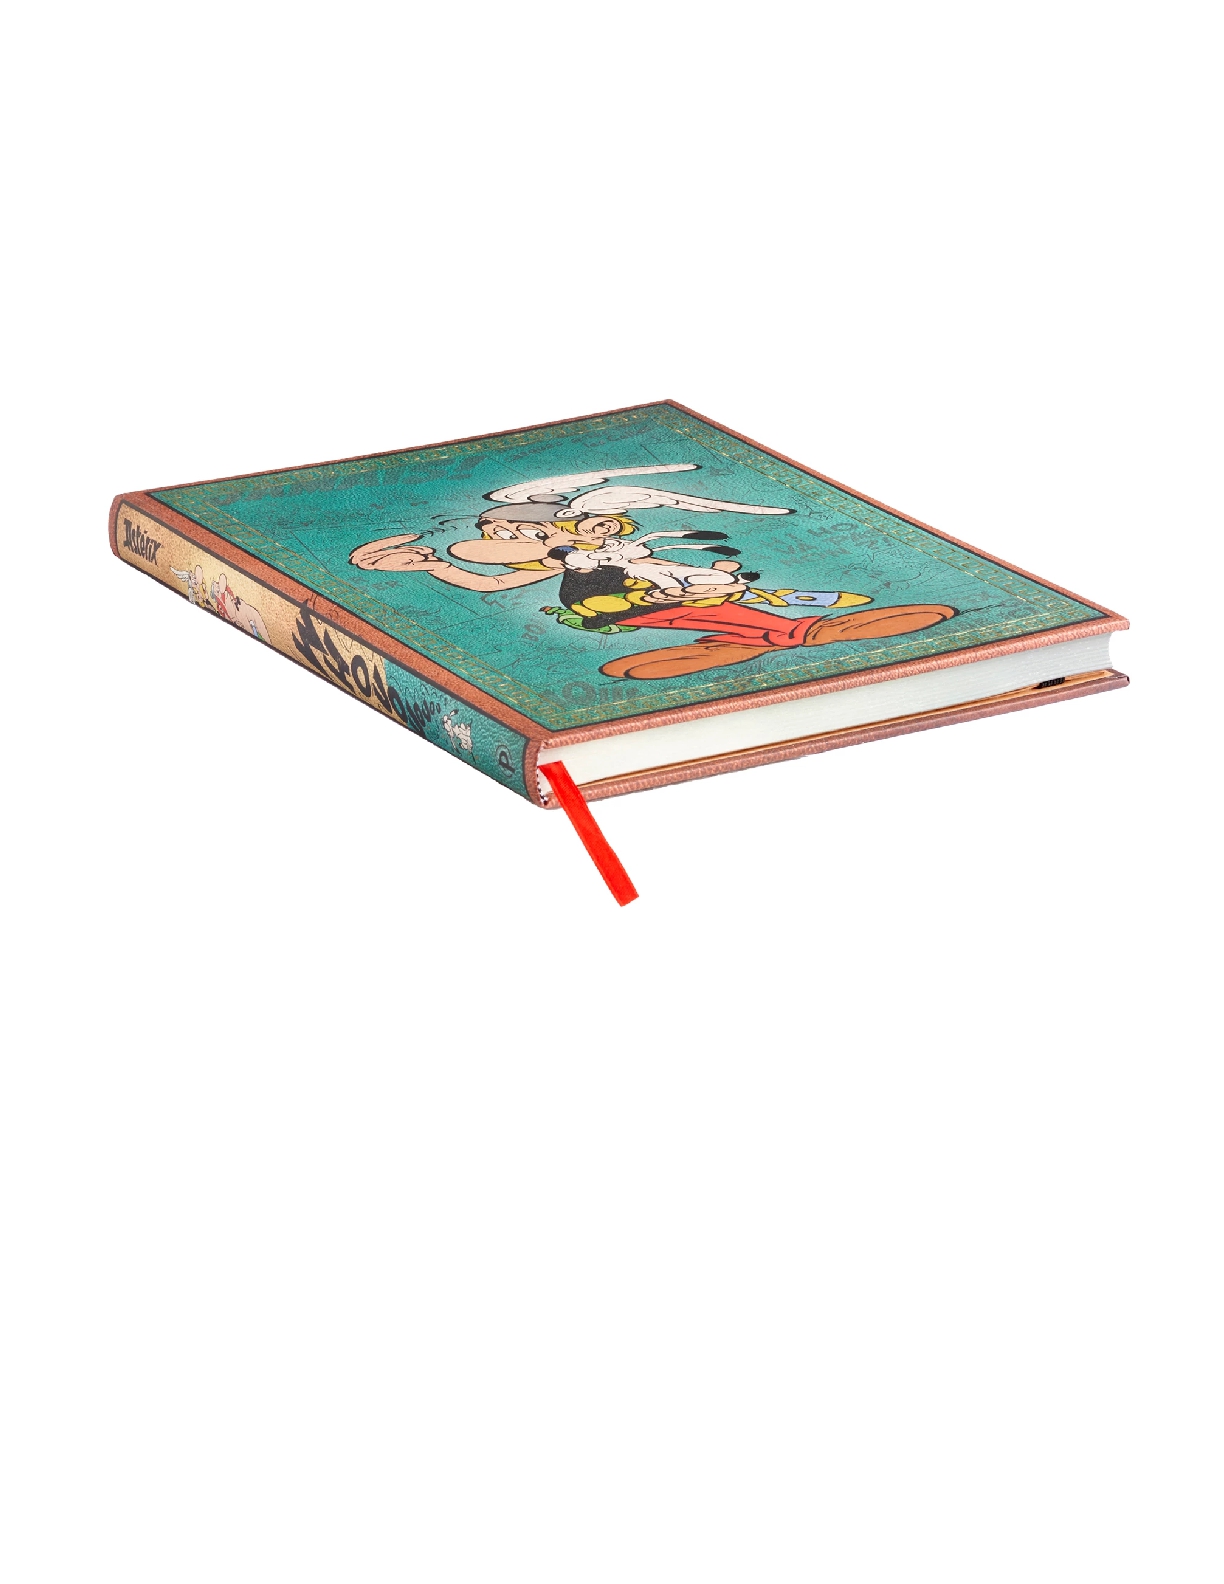 Asterix the Gaul, The Adventures of Asterix, Hardcover Journals, Ultra, Lined, Elastic Band, 144 Pg, 120 GSM